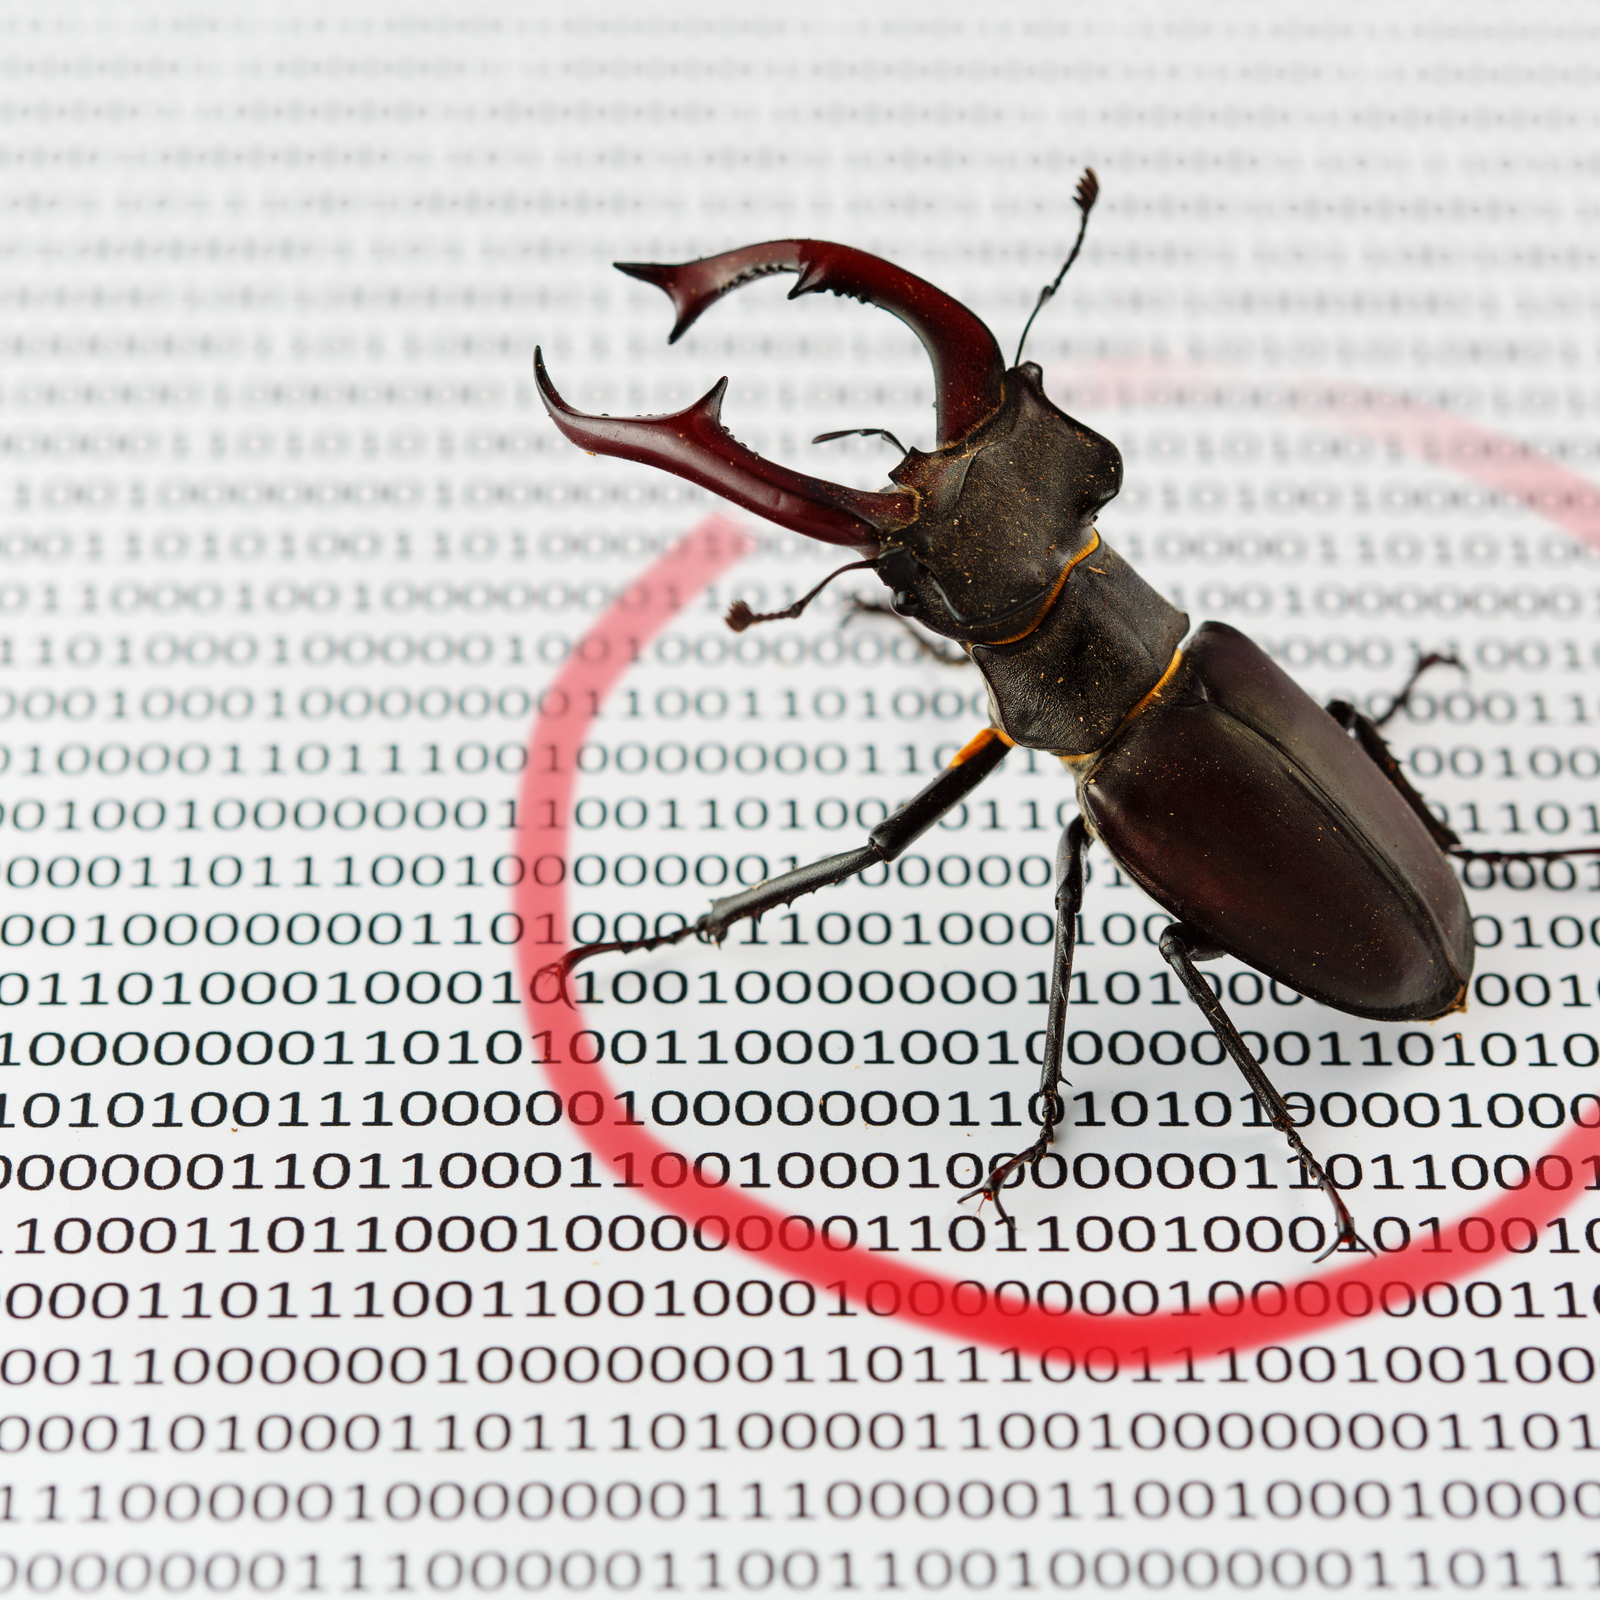 25% of All Smart Contracts Contain Critical Bugs